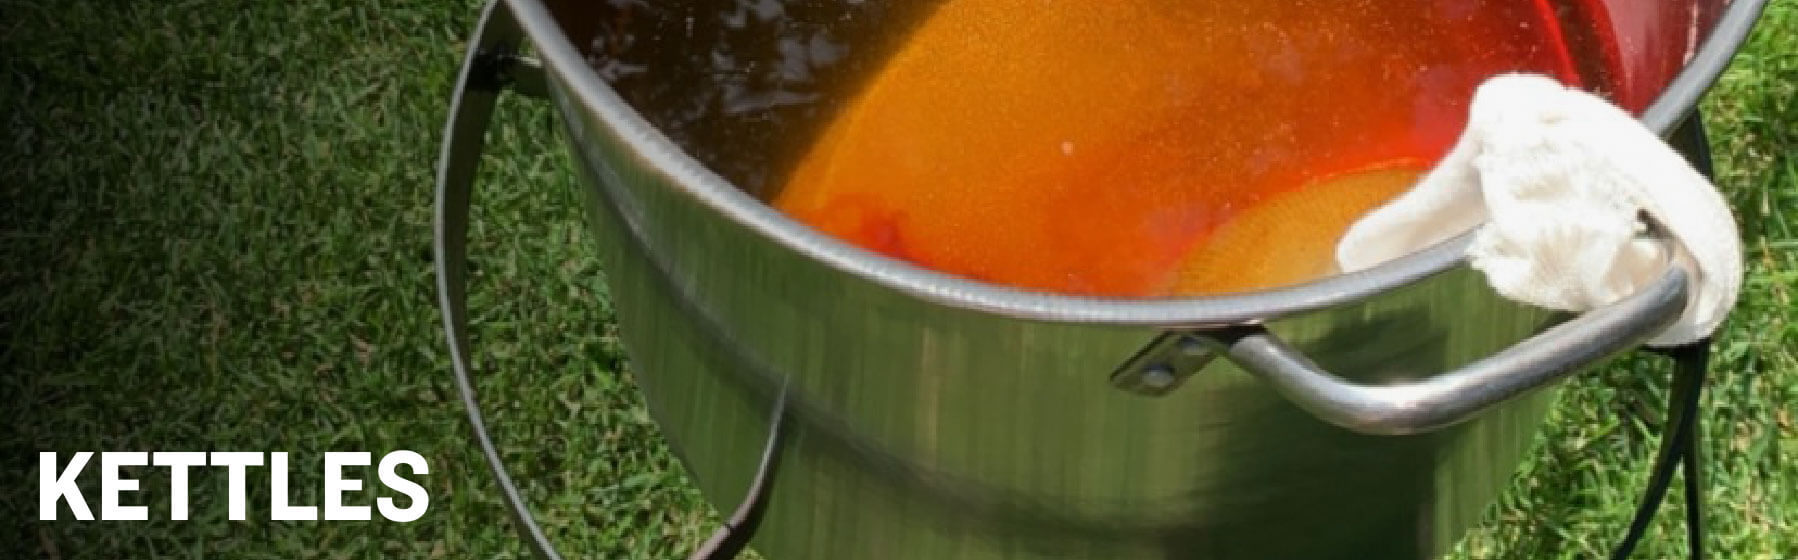 Image of a kettle with wort in grass with the word Kettle on top